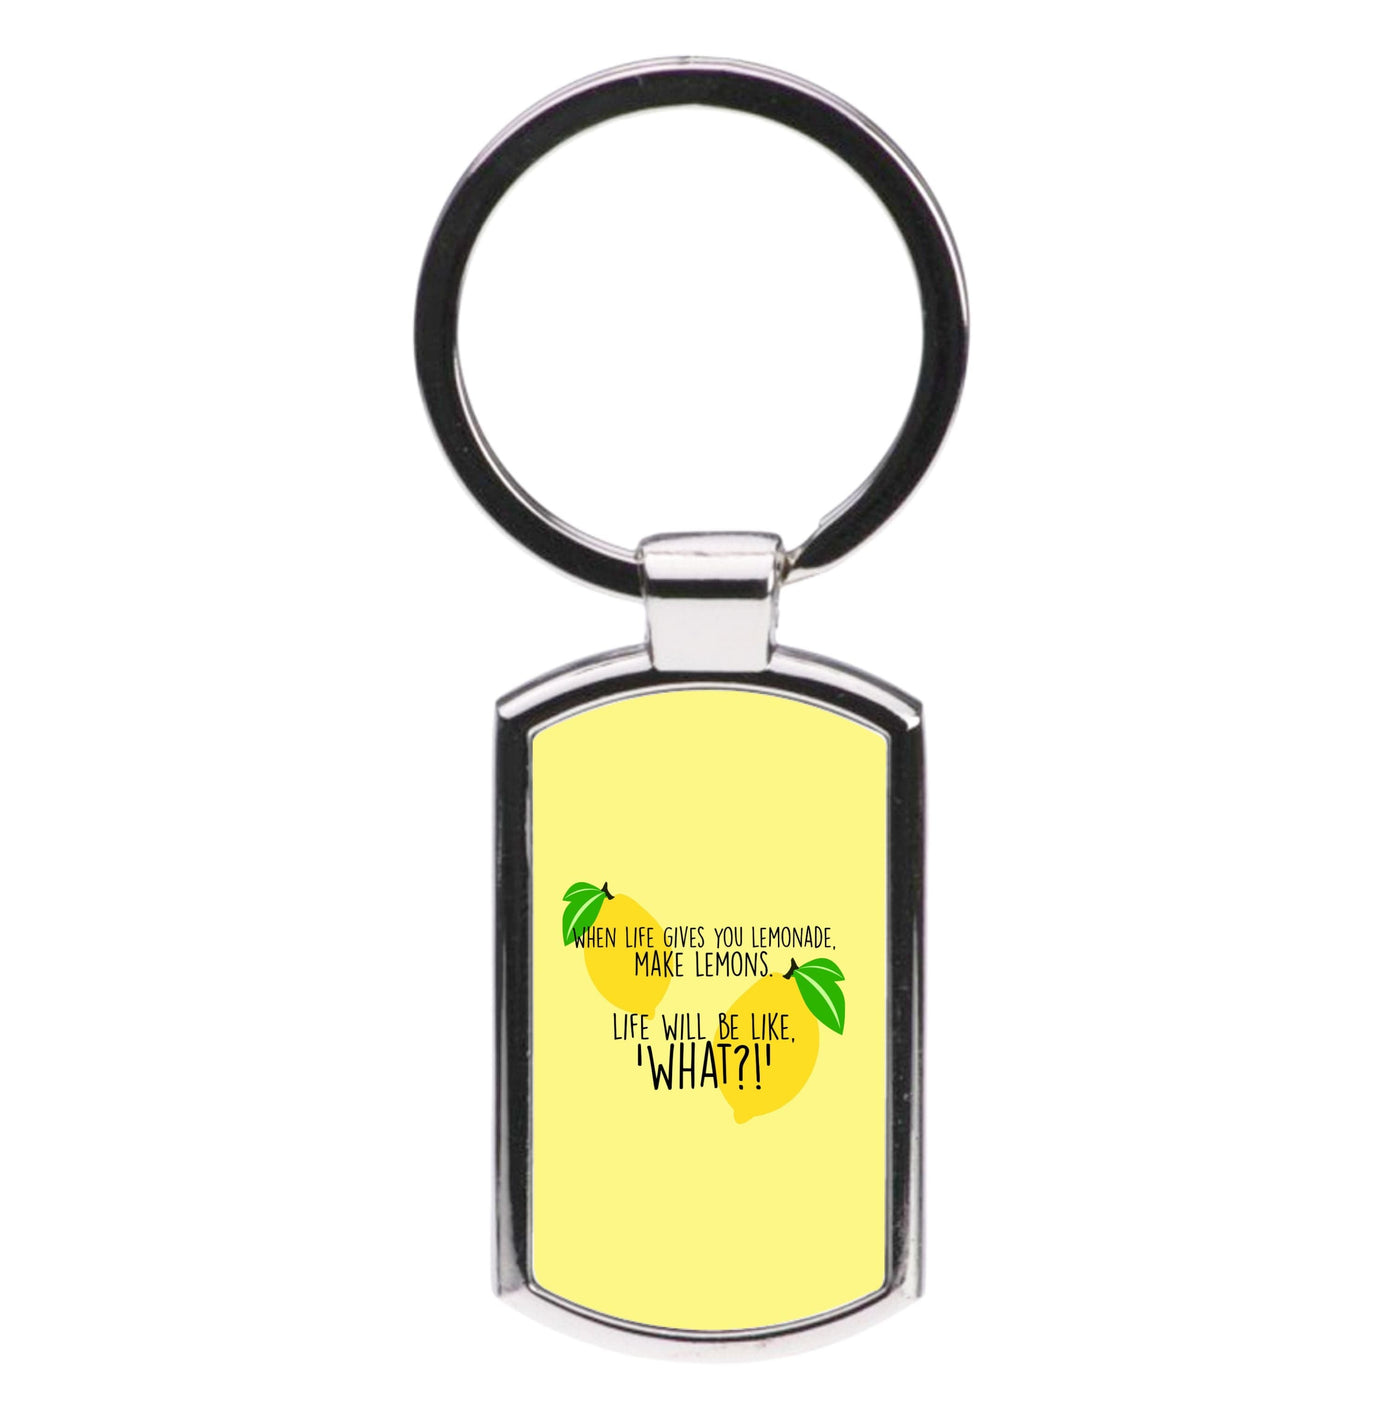 When Life Gives You Lemonade - TV Quotes Luxury Keyring